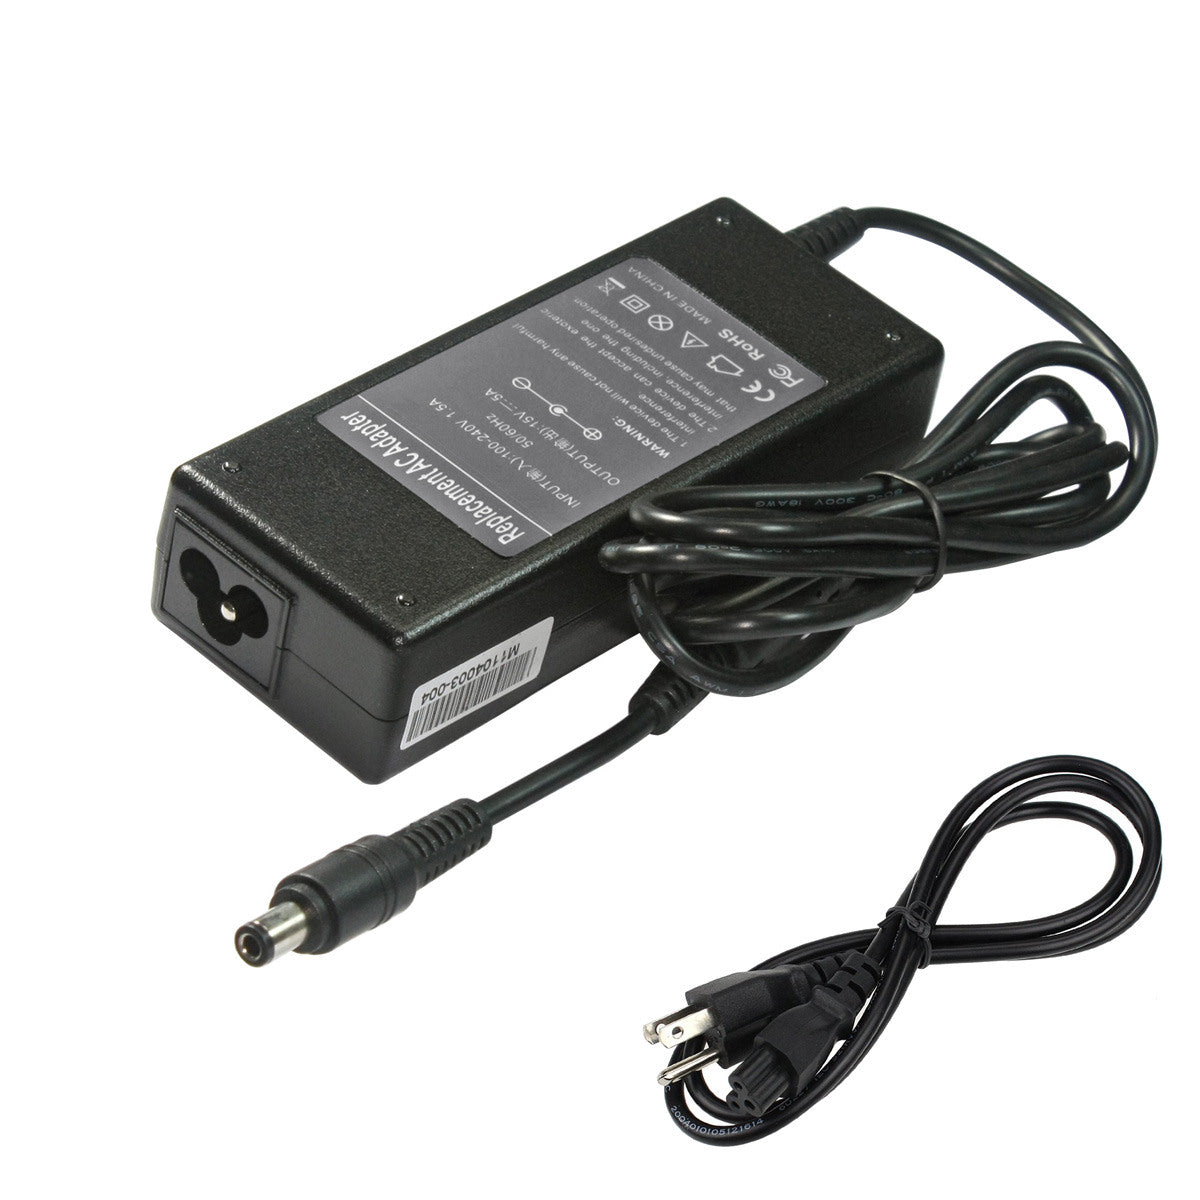 Compatible Replacement Toshiba Satellite M55-S3311 AC Adapter 75Watt 15V 5A.